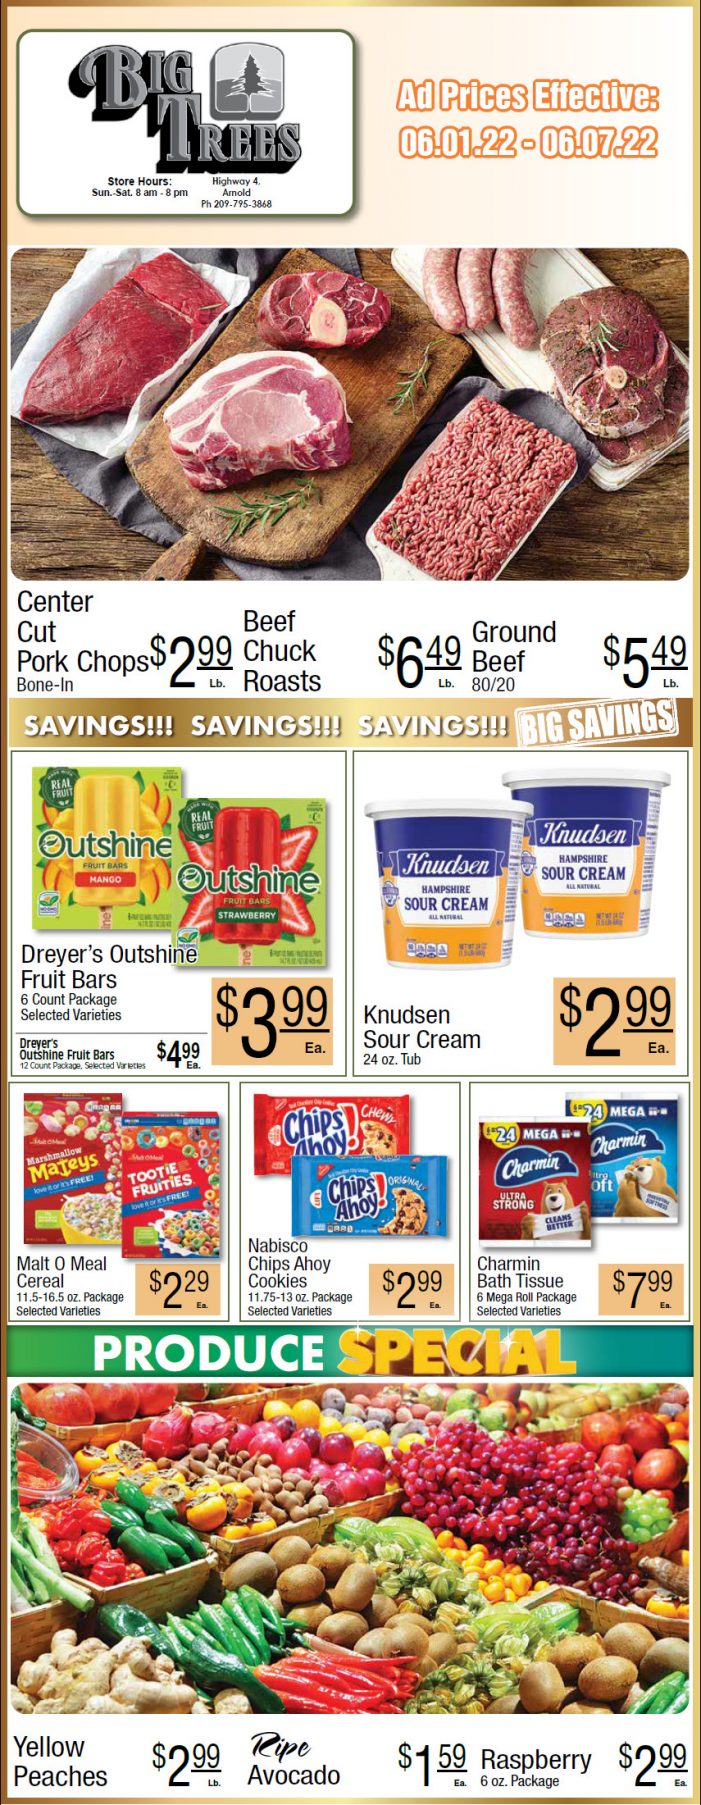 Big Trees Market Weekly Ad & Grocery Specials June 1 – 7!  Shop Local & Save!